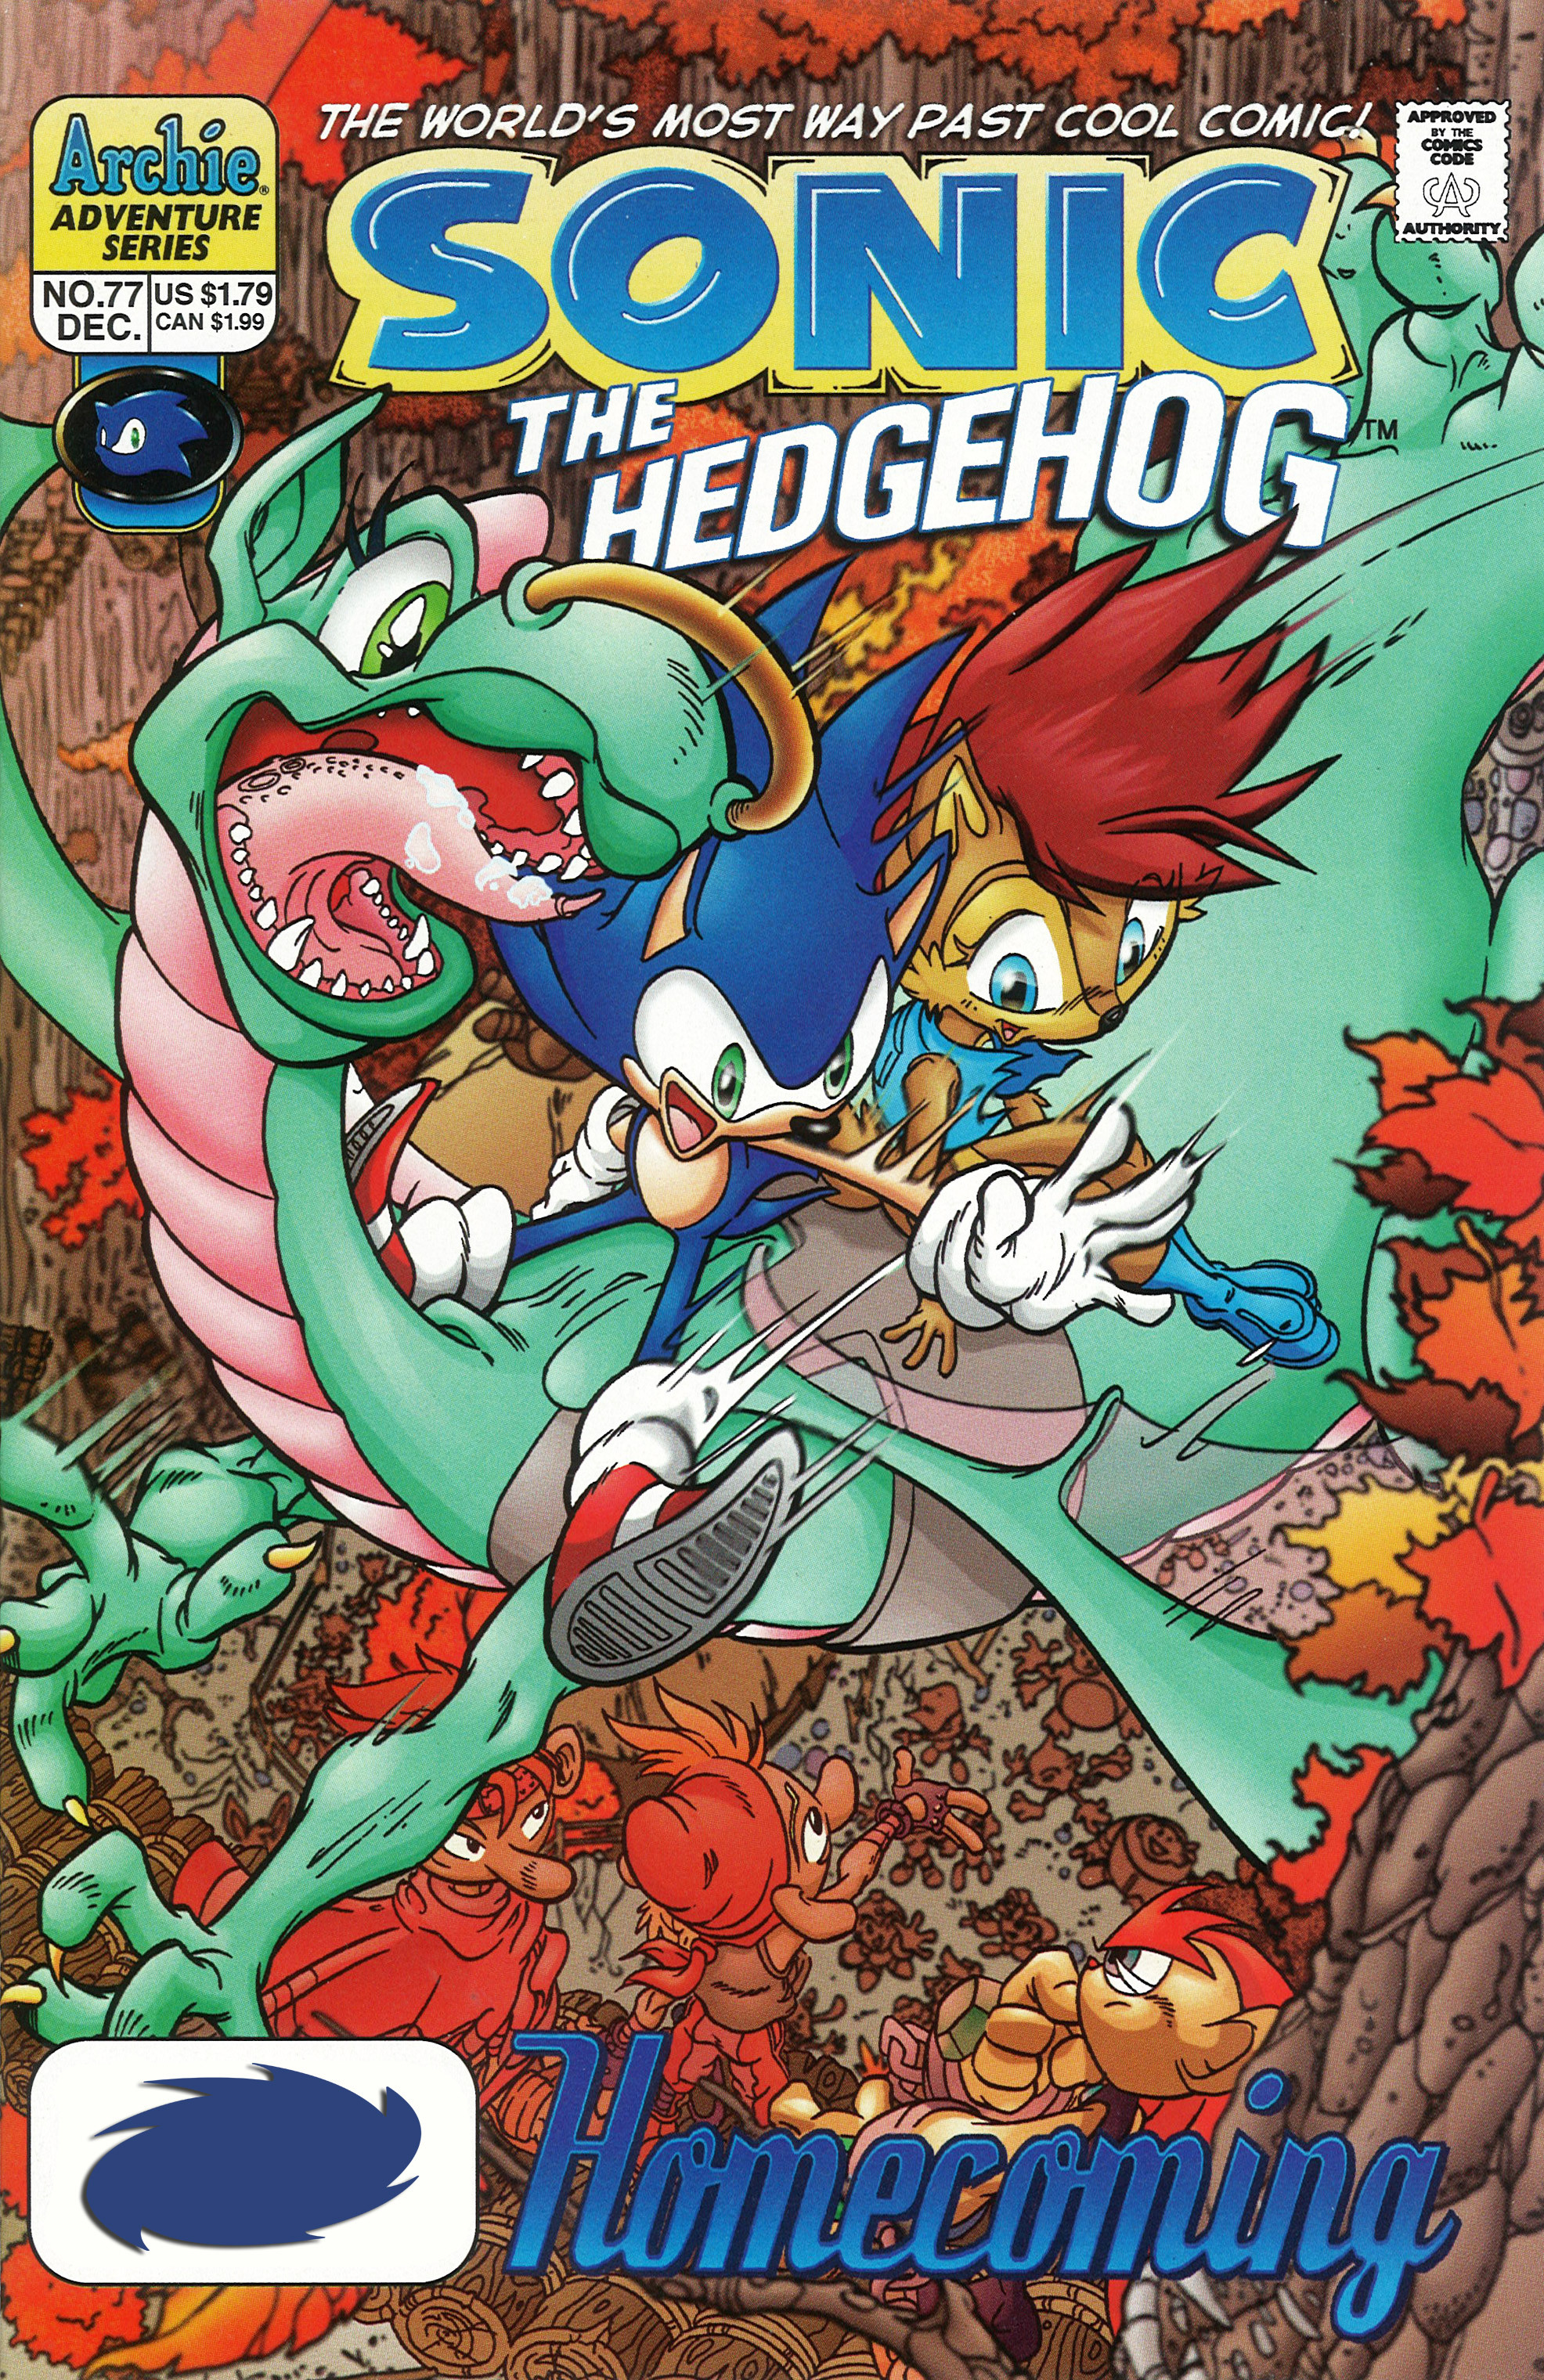 Archie Sonic the Hedgehog Issue 186 | Mobius Encyclopaedia 